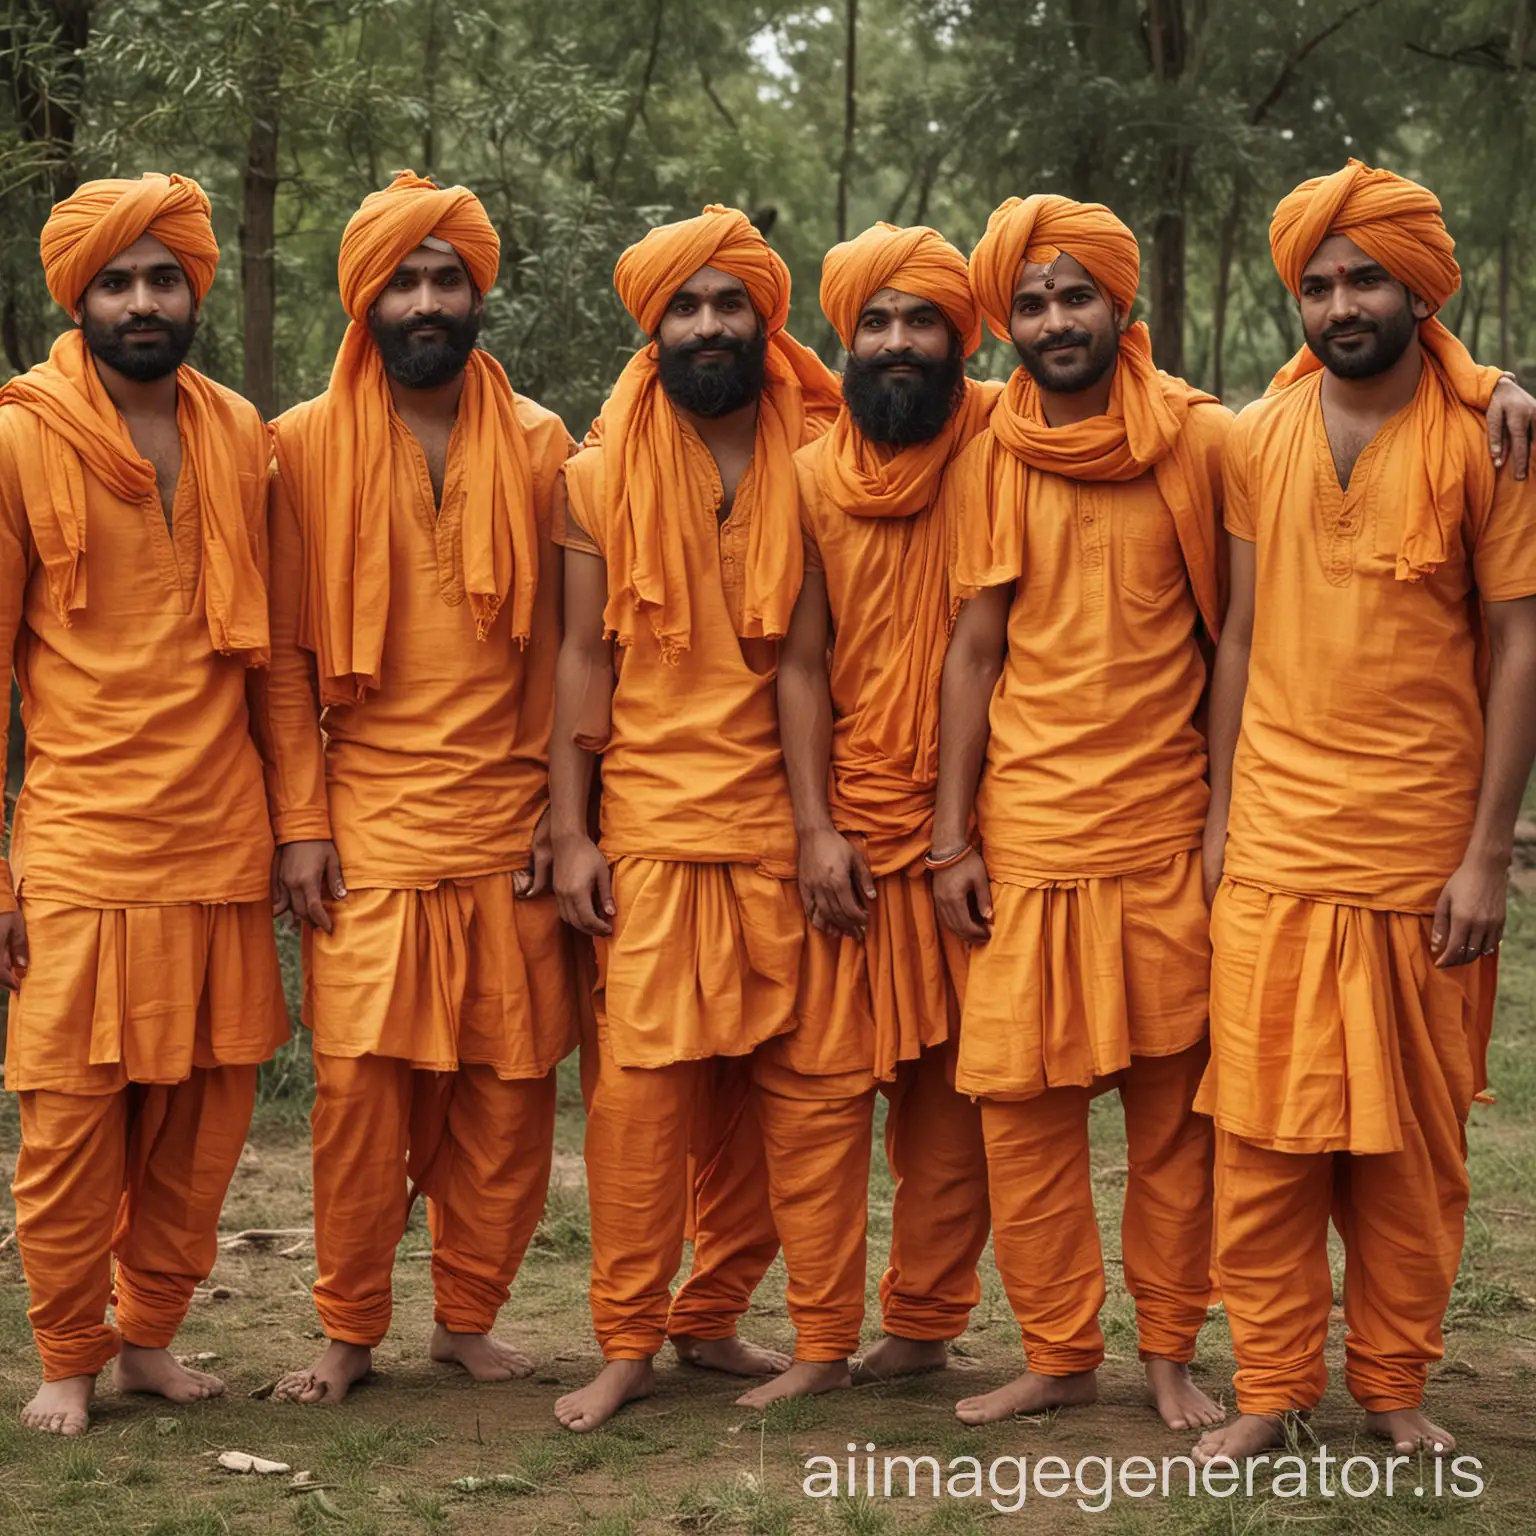 Somewhere Hindu brothers are standing together wearing saffron clothes.